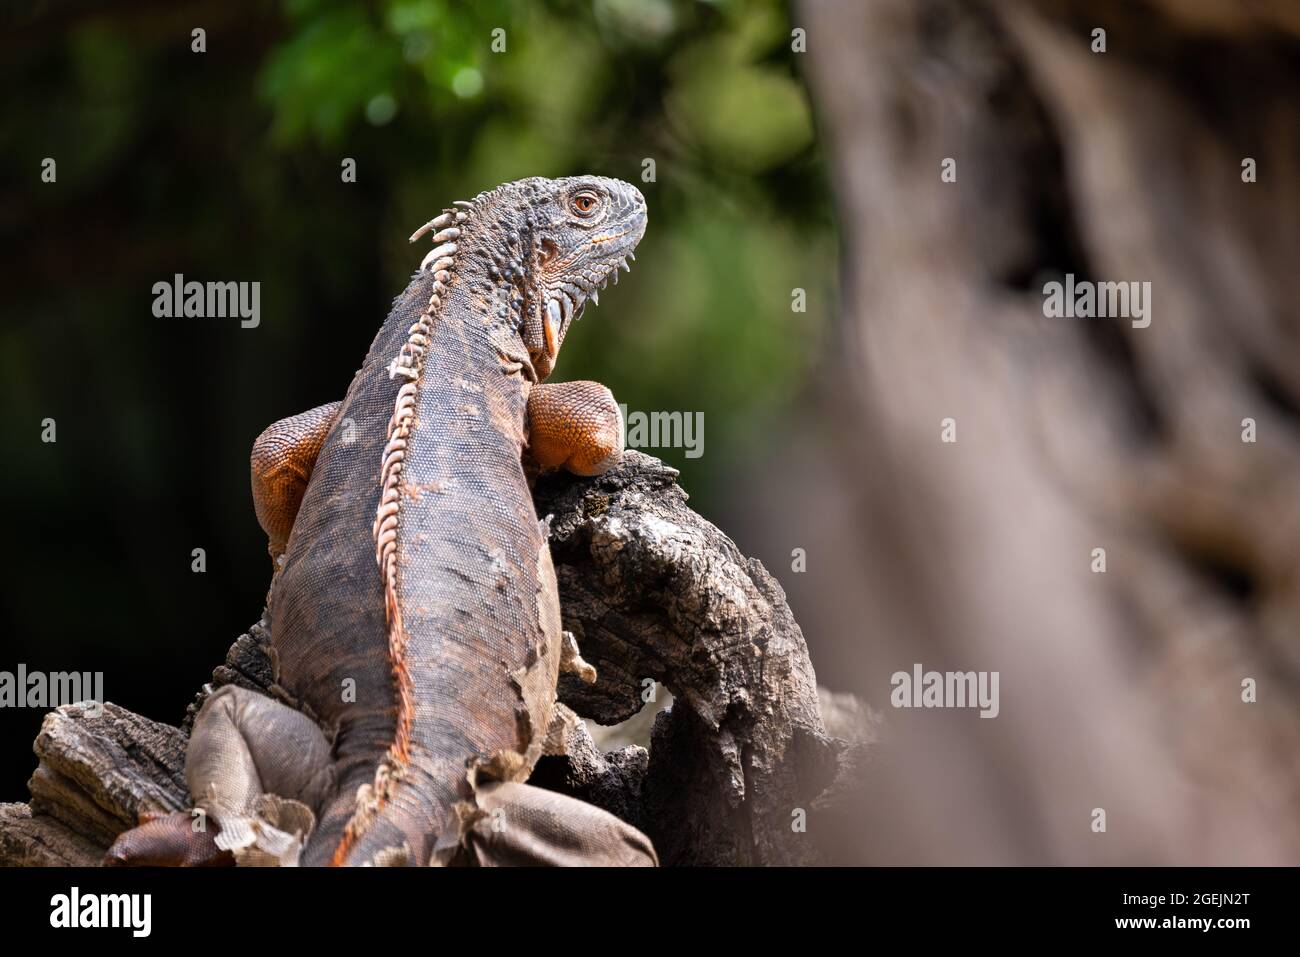 Close up portrait of a green iguana with orange hide climbing on a tree trunk, against a green bokeh background Stock Photo